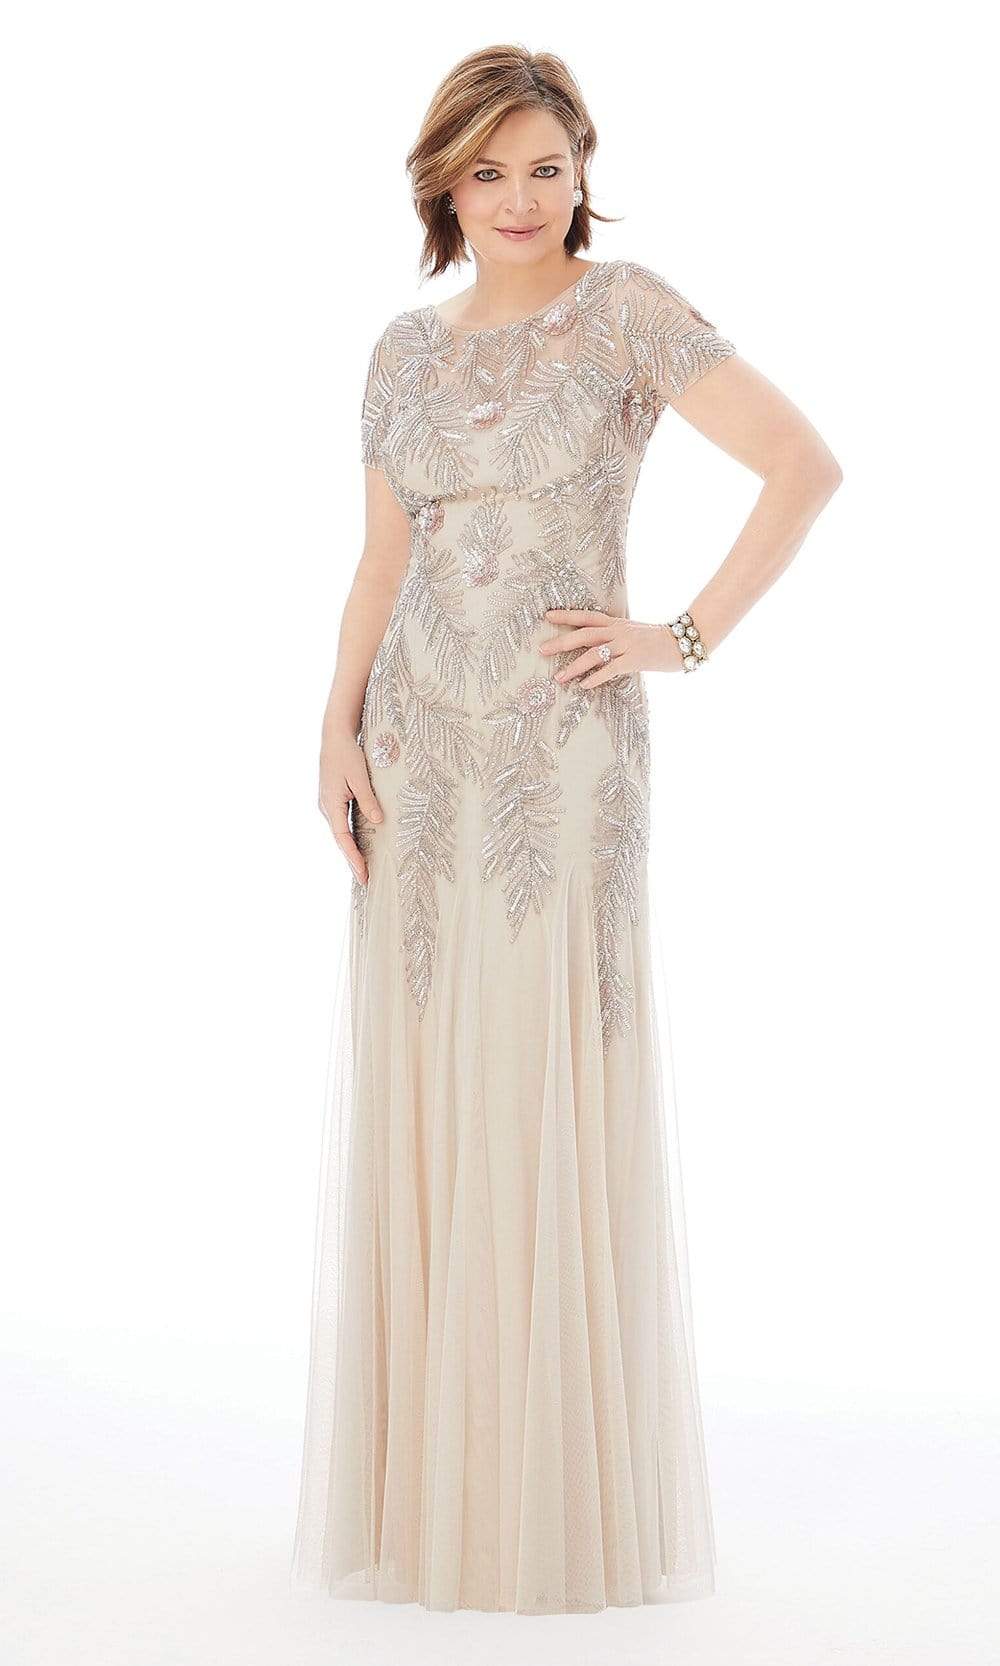 MGNY By Mori Lee - 72211 Sequin Ornate Mesh Column Godet Gown Mother of the Bride Dresses 2 / Champagne/Blush